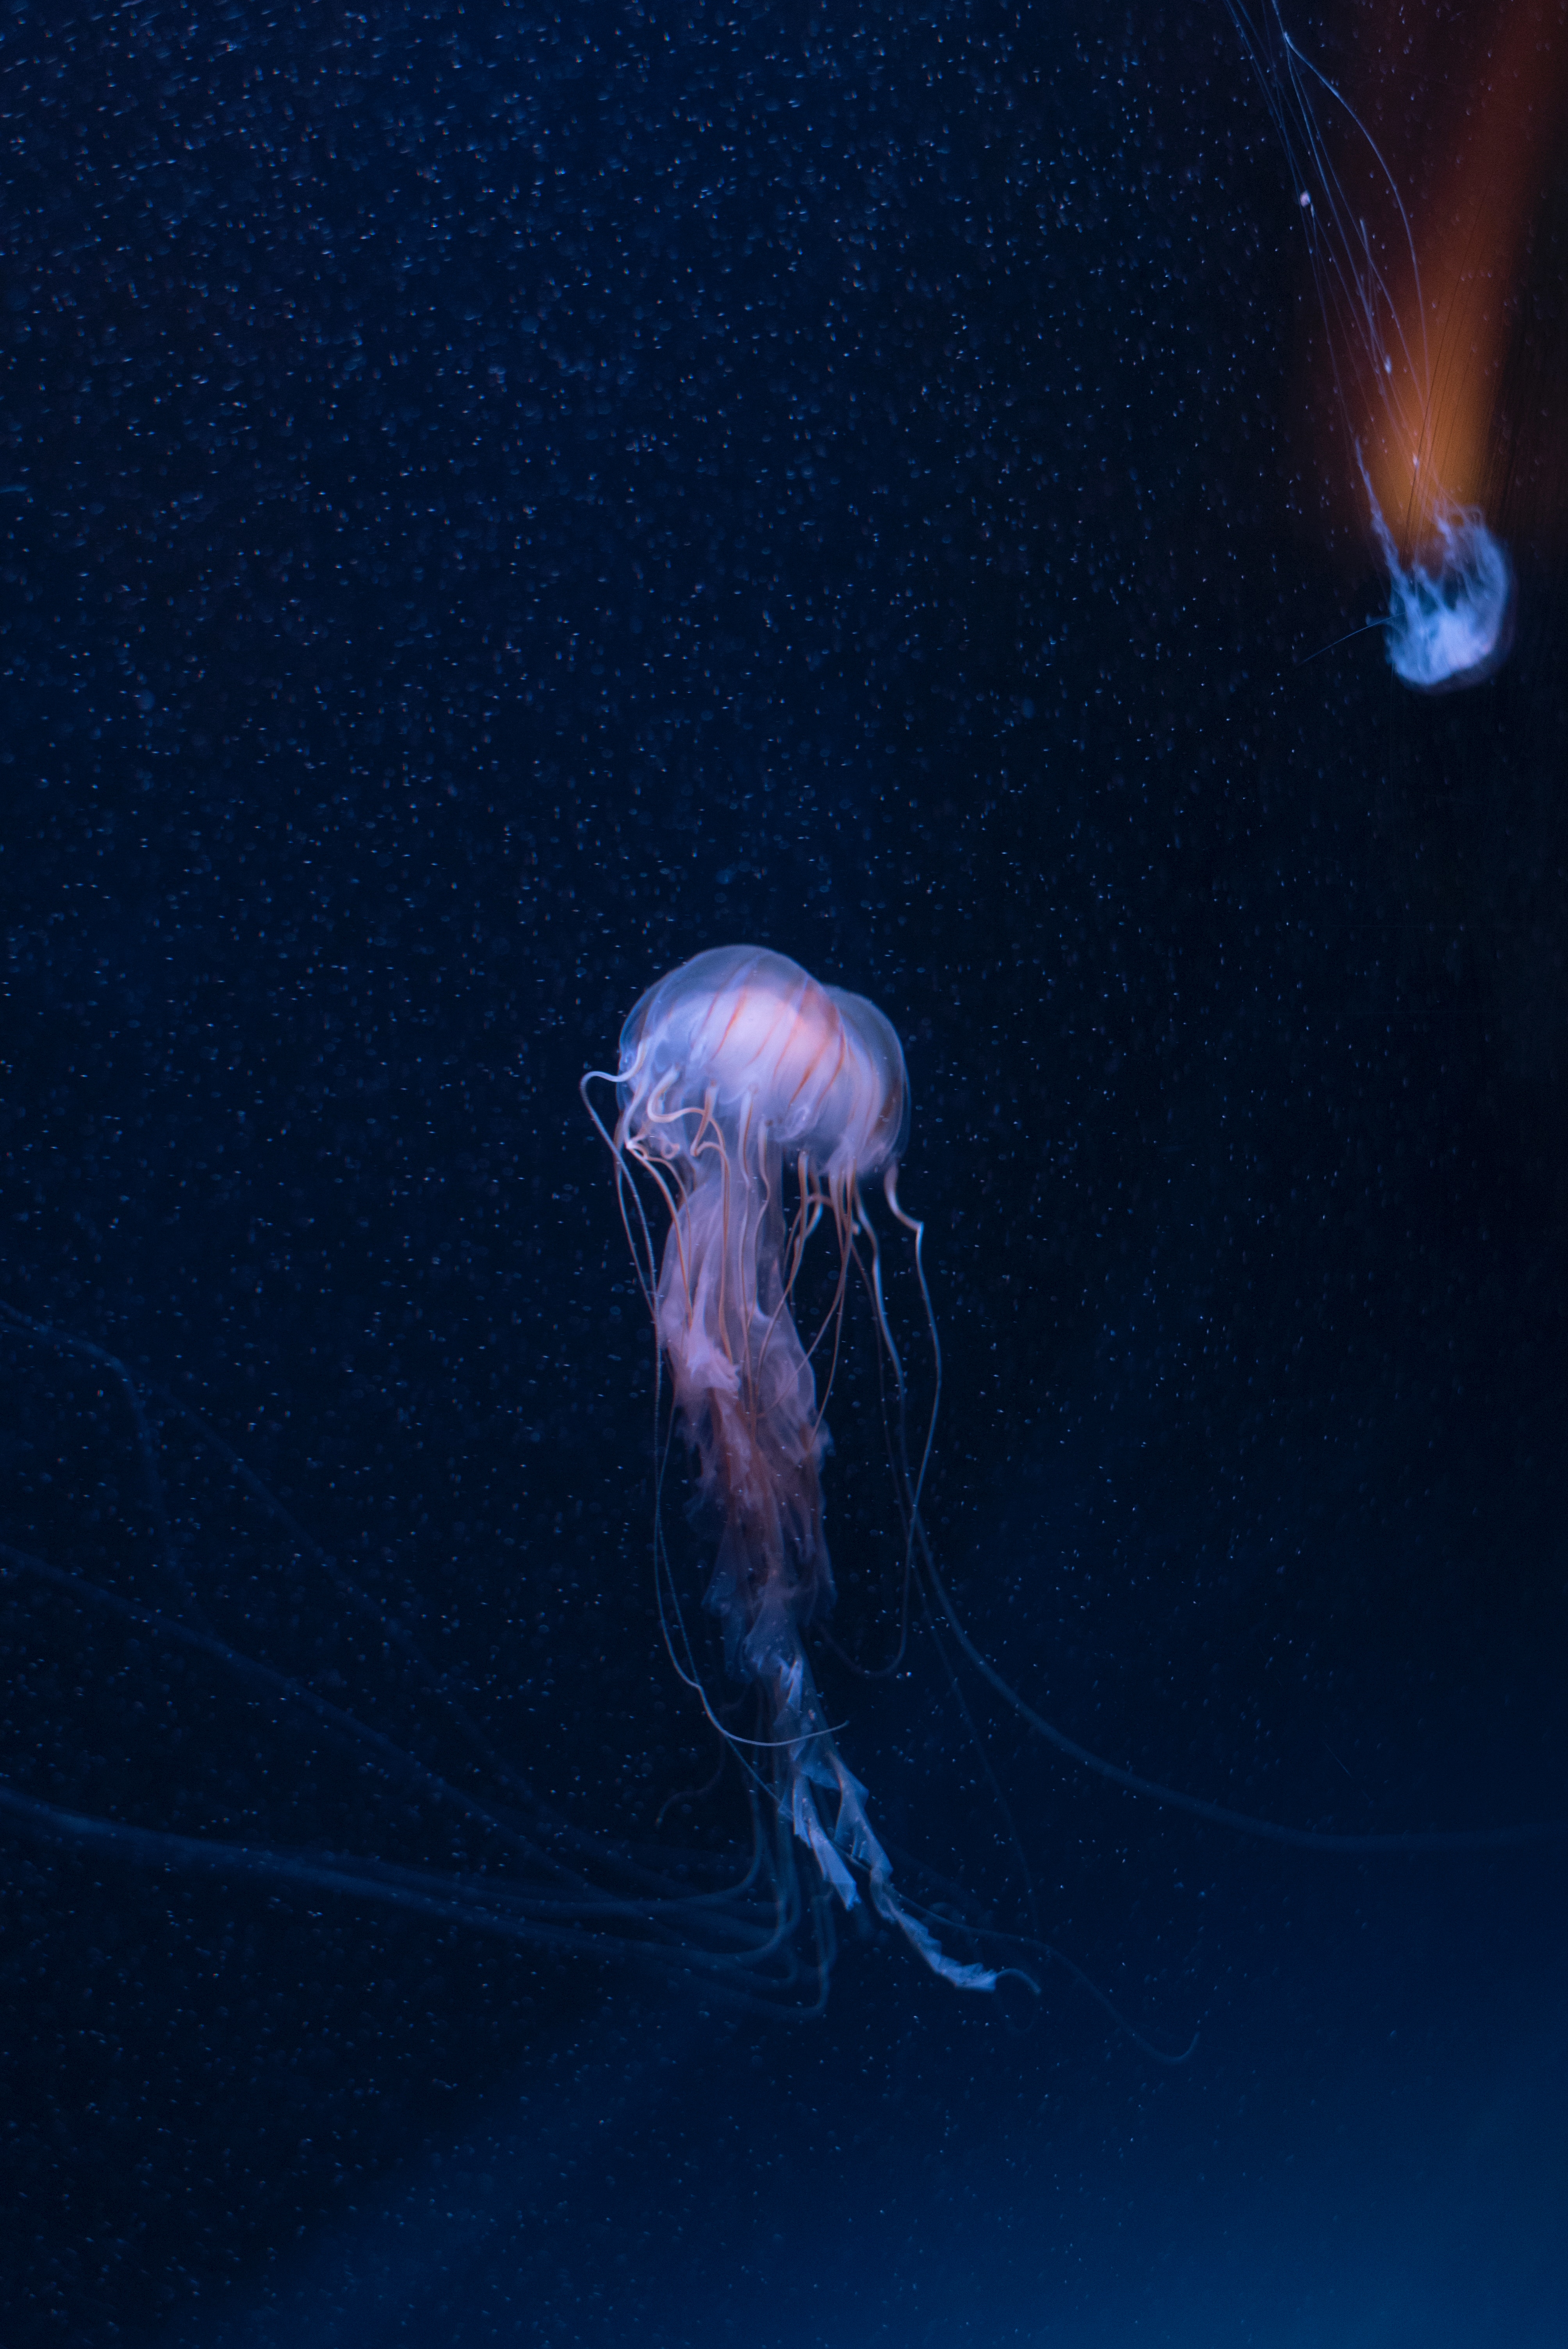 126465 Screensavers and Wallpapers Underwater for phone. Download animals, jellyfish, ocean, underwater world, tentacles, underwater, submarine pictures for free